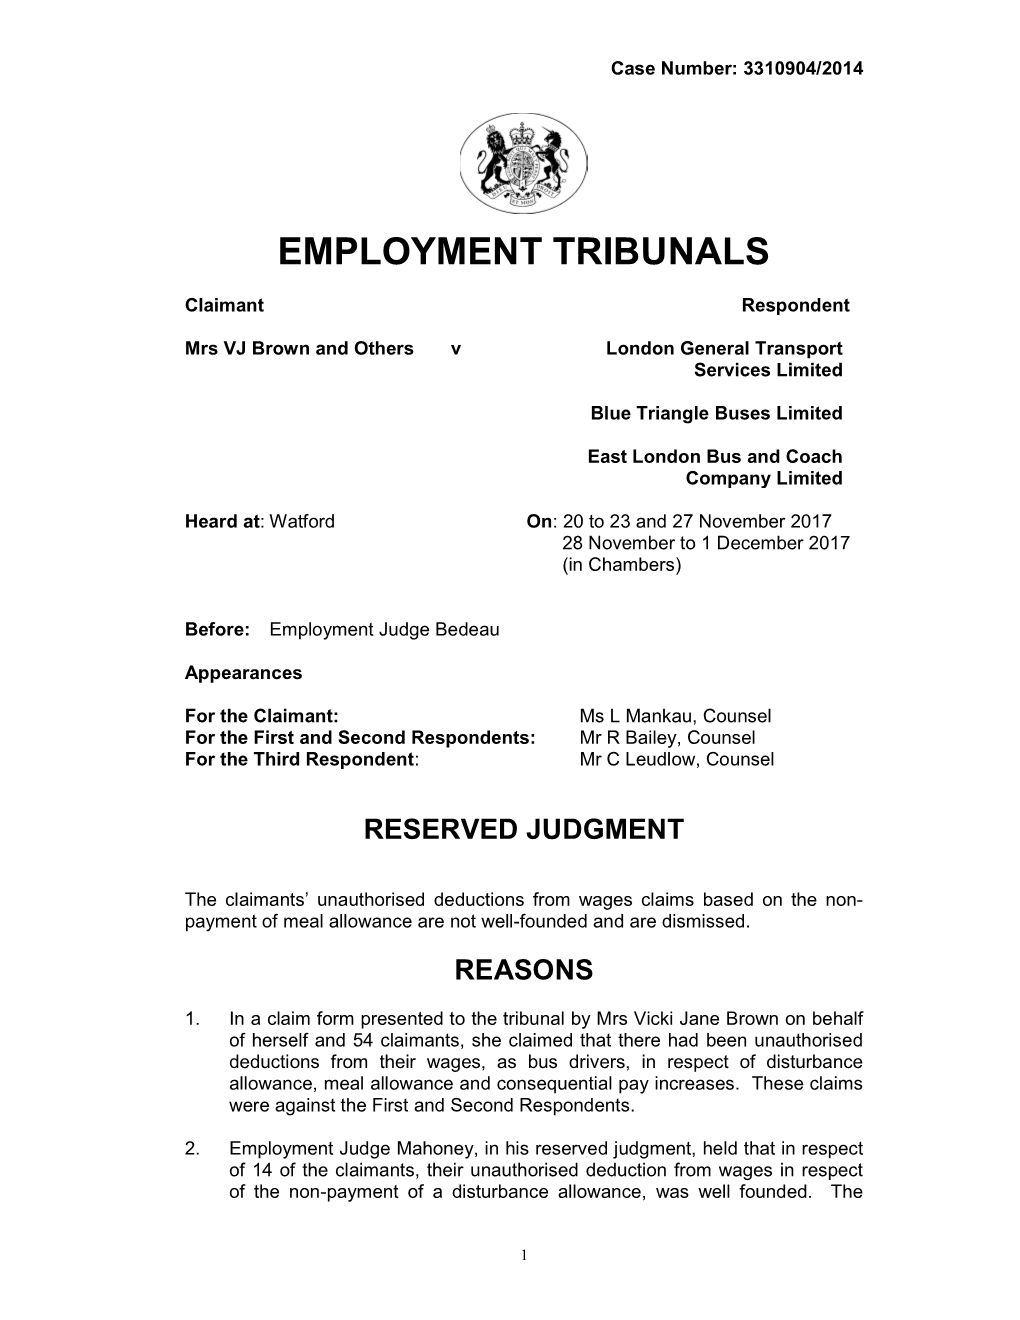 Mrs VJ Brown and Others V London General Transport Services Ltd and Others